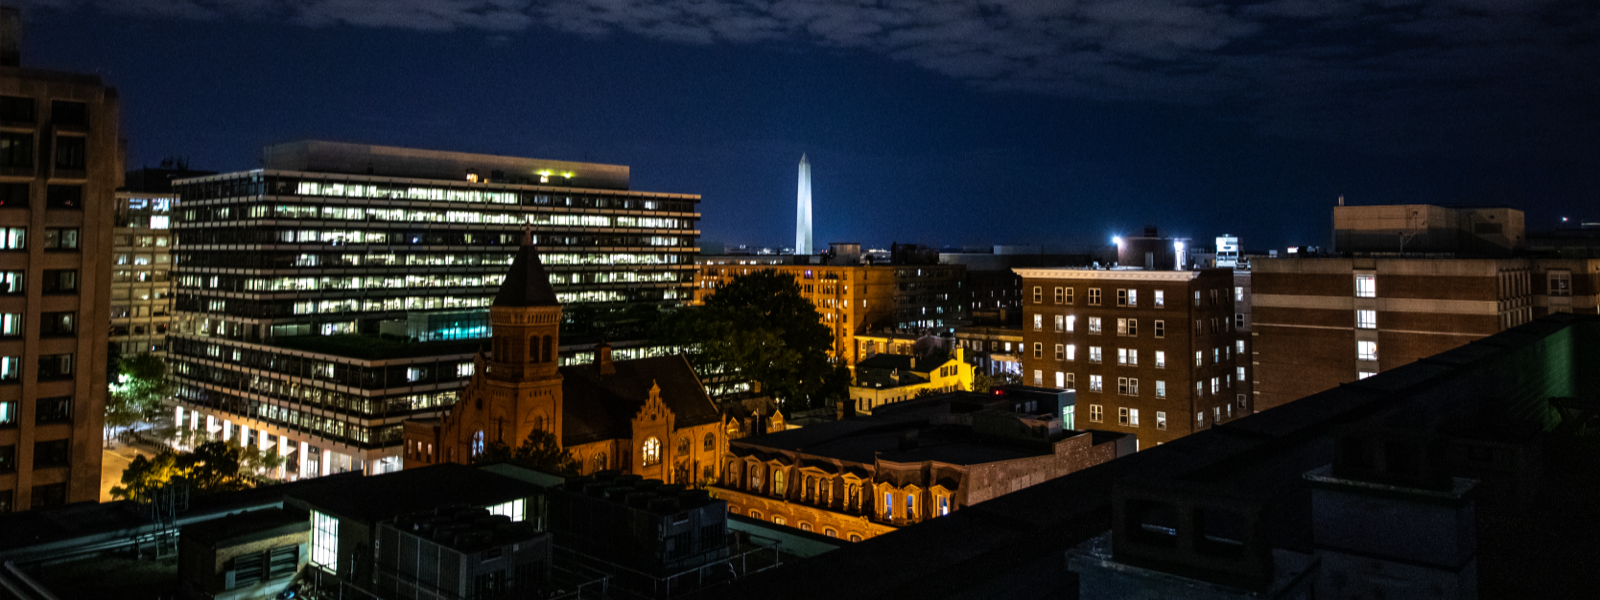 Foggy Bottom at night with the Washington Monument in the background